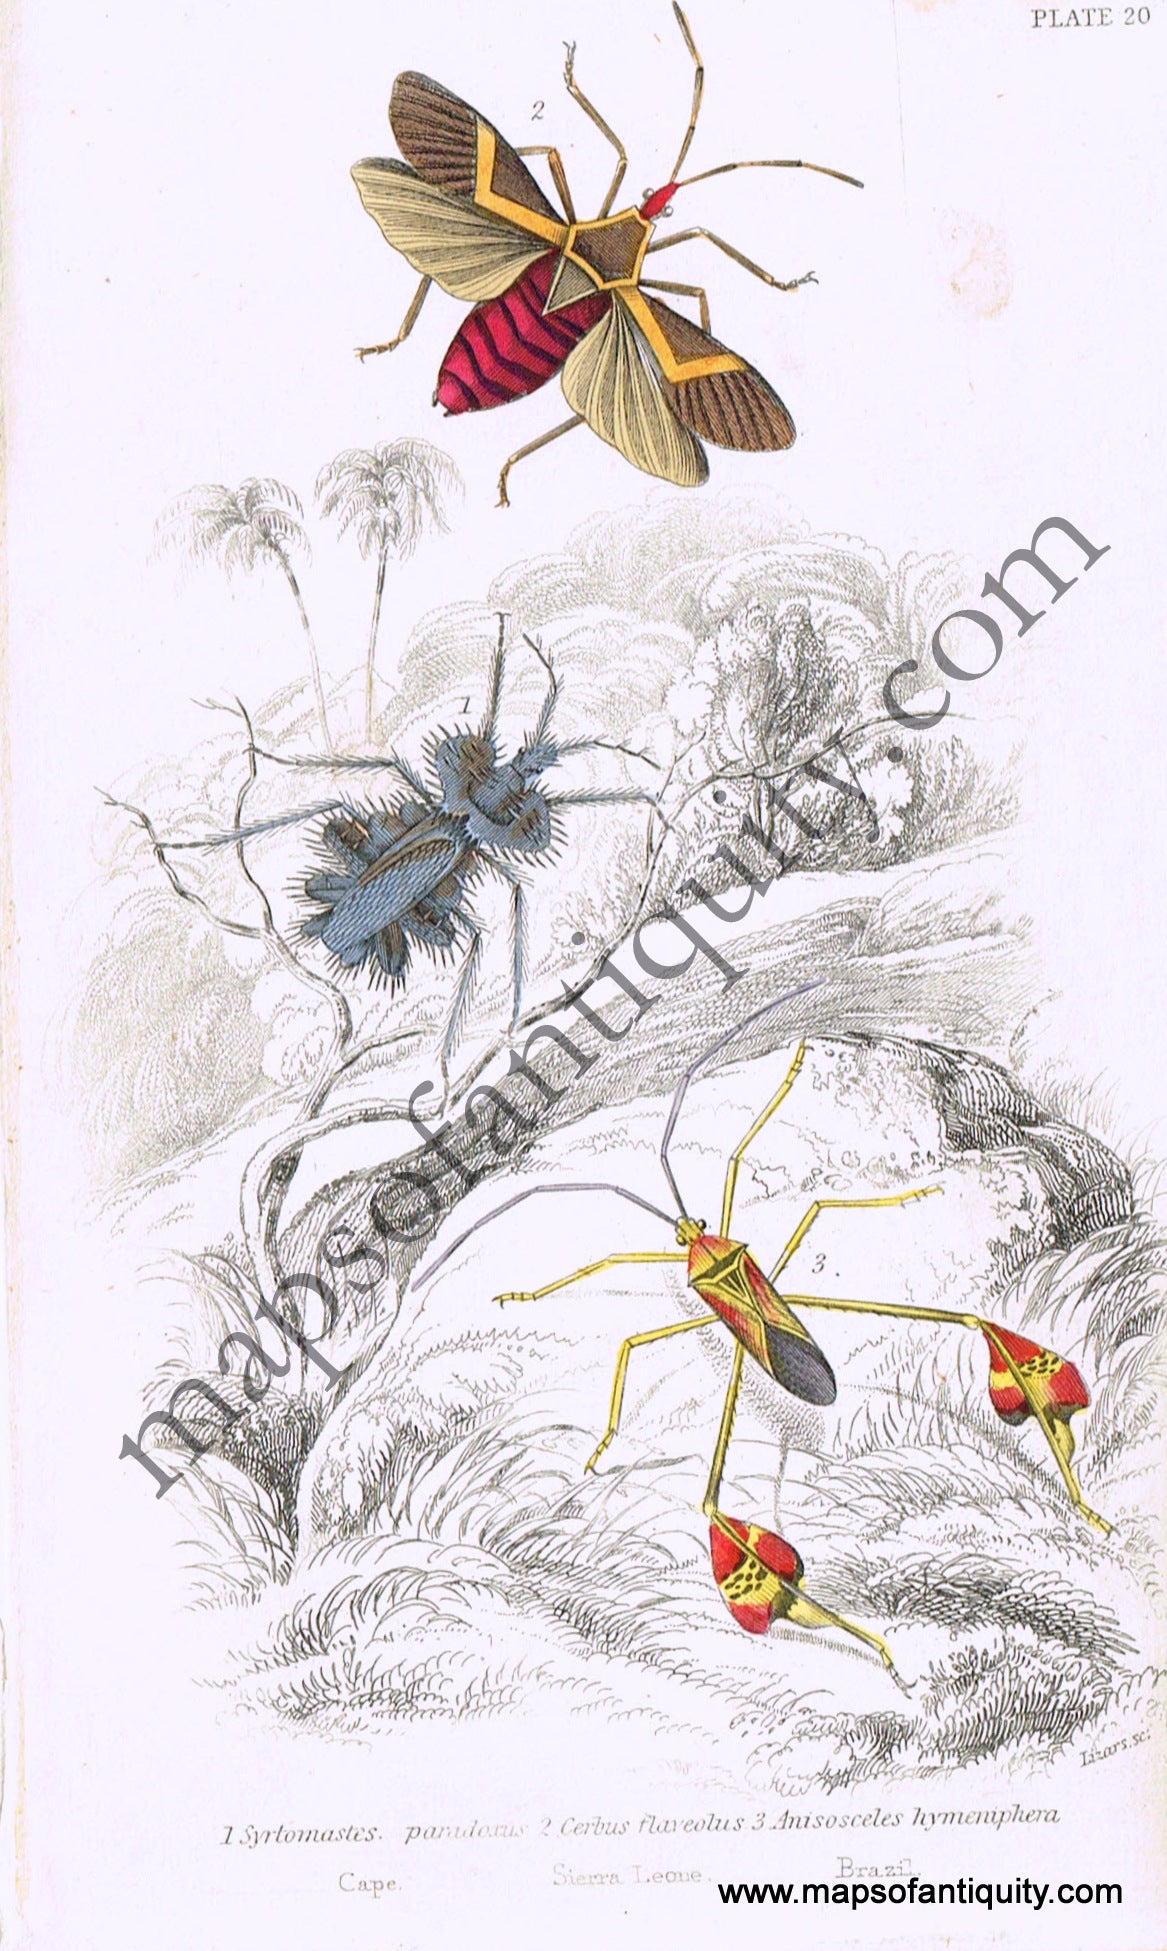 Antique-Hand-Colored-Print-Syrtomastes-paradoxus-Cerbus-flaveobus-&-Anisosceles-hymeniphera-Antique-Prints-Natural-History-Insects-1840-Duncan-Maps-Of-Antiquity